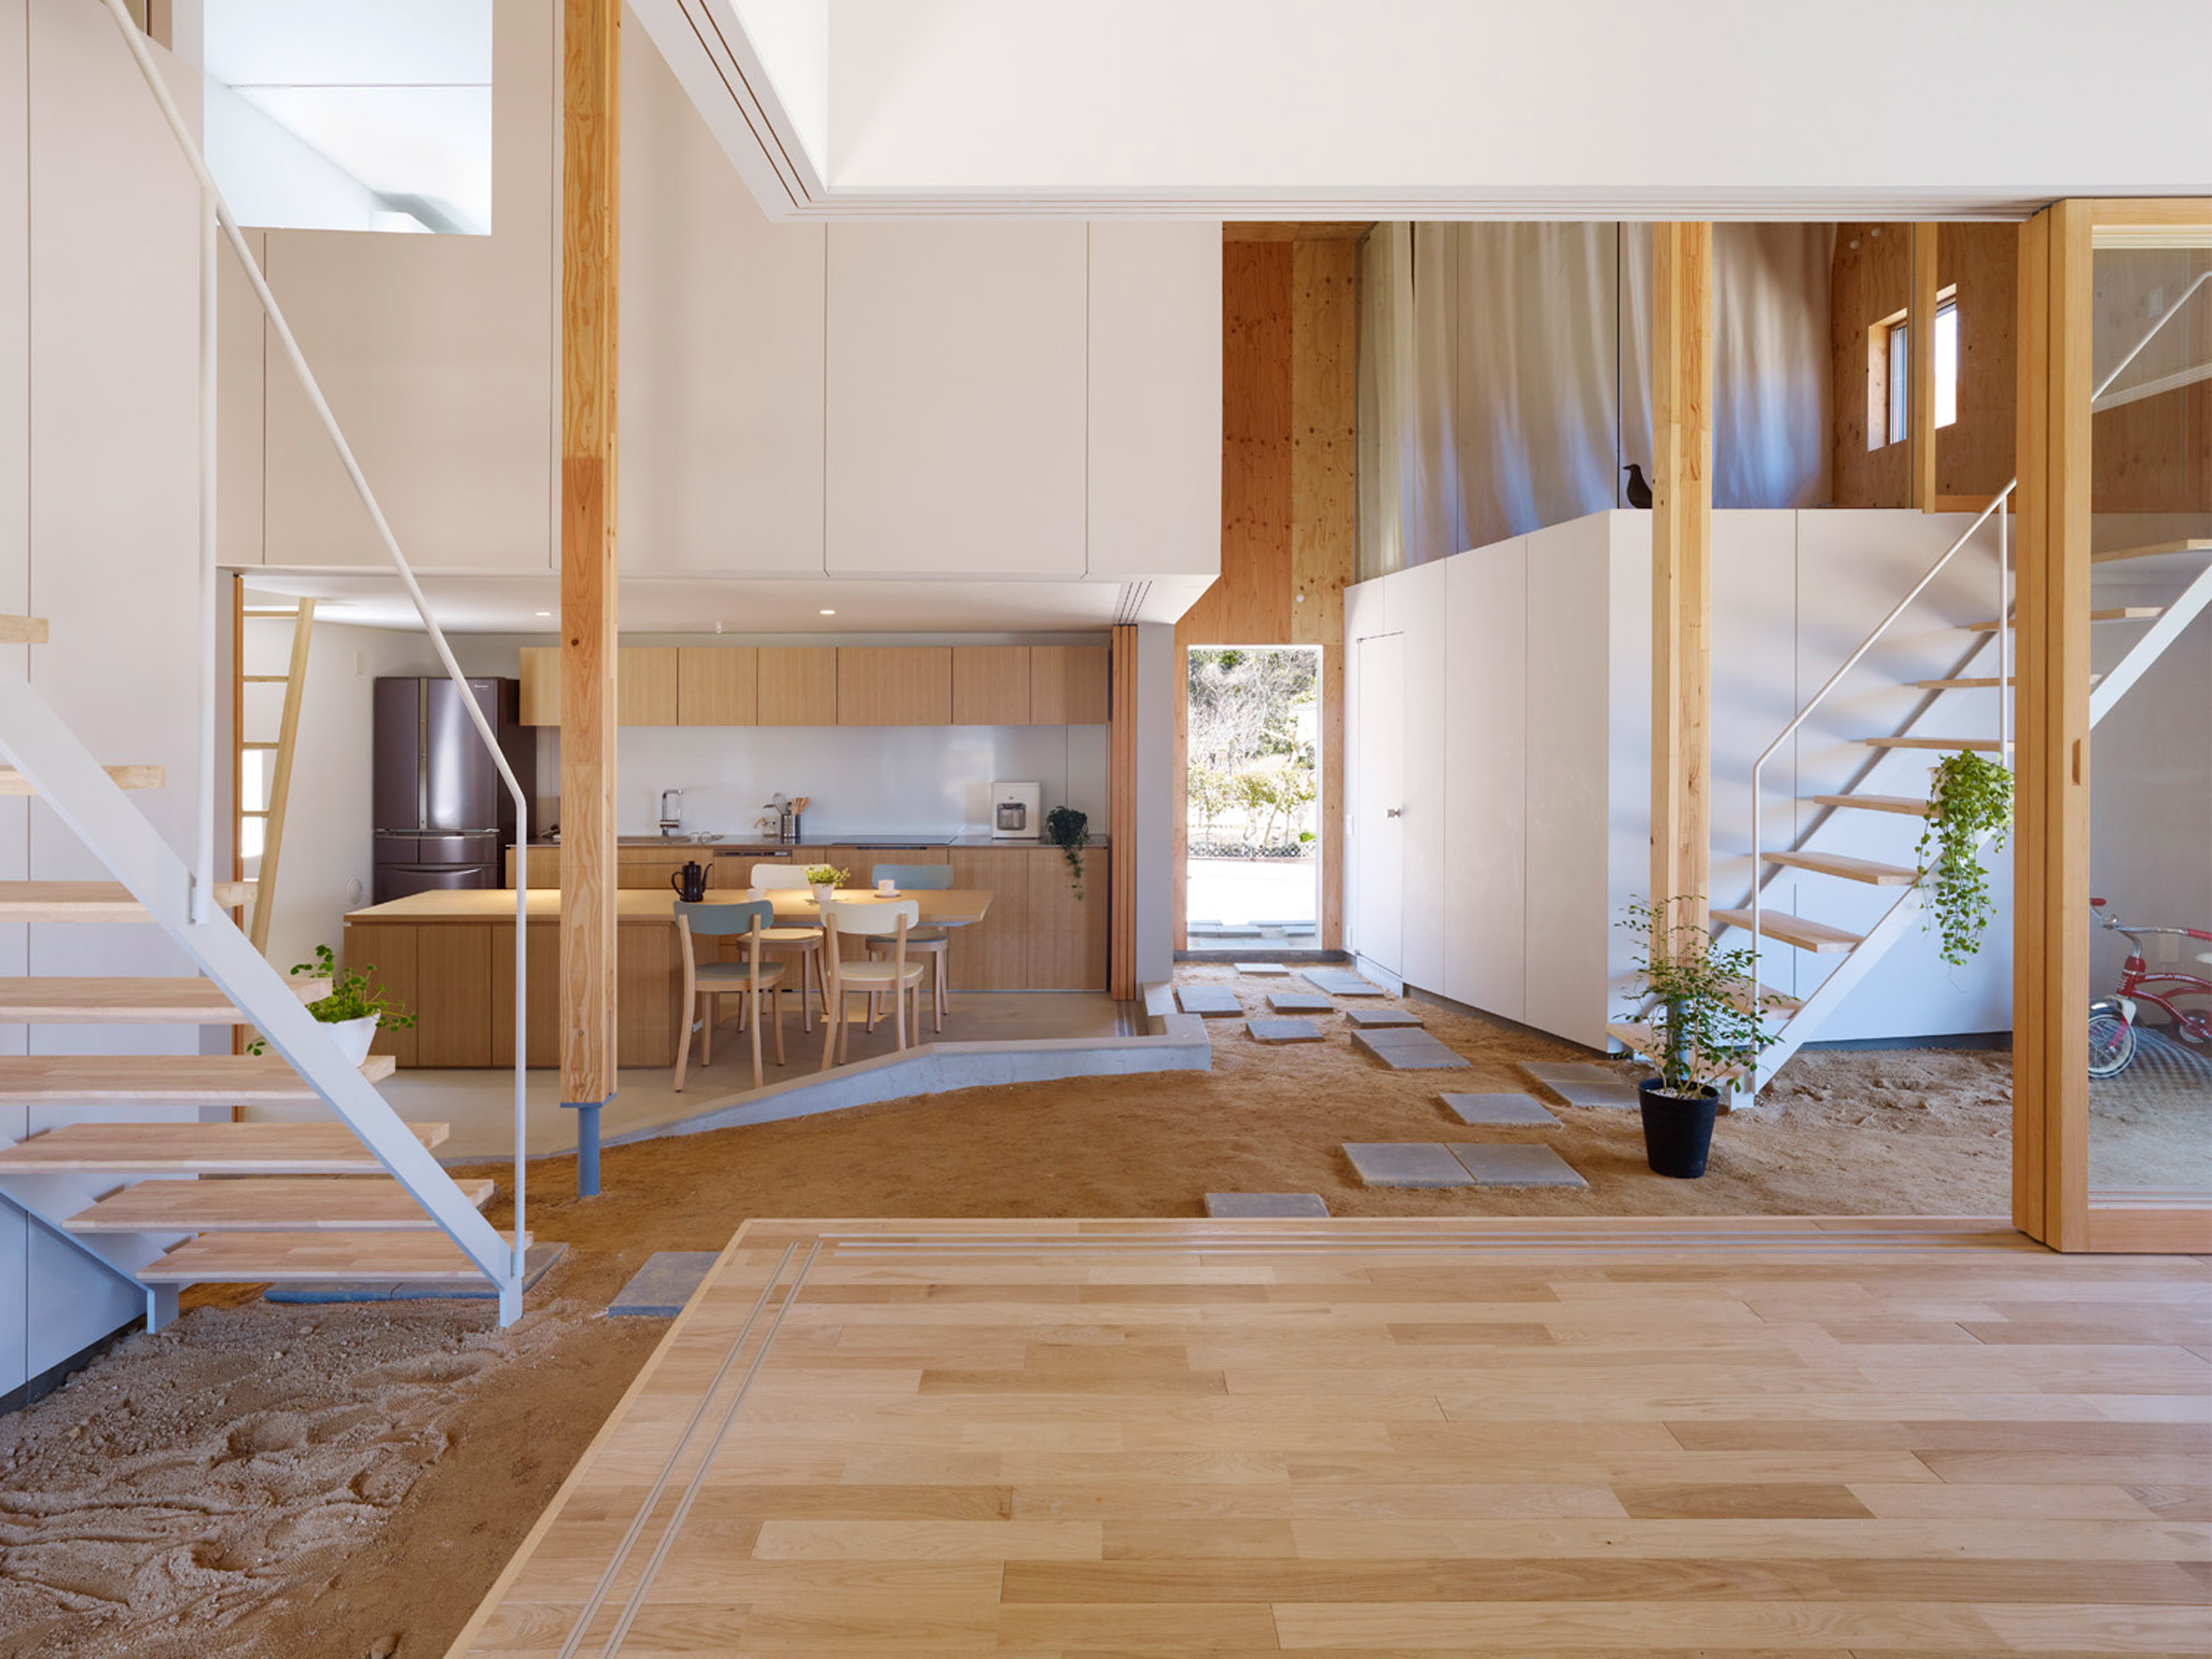 House in Takaya features 21st-century take on traditional Japanese doma